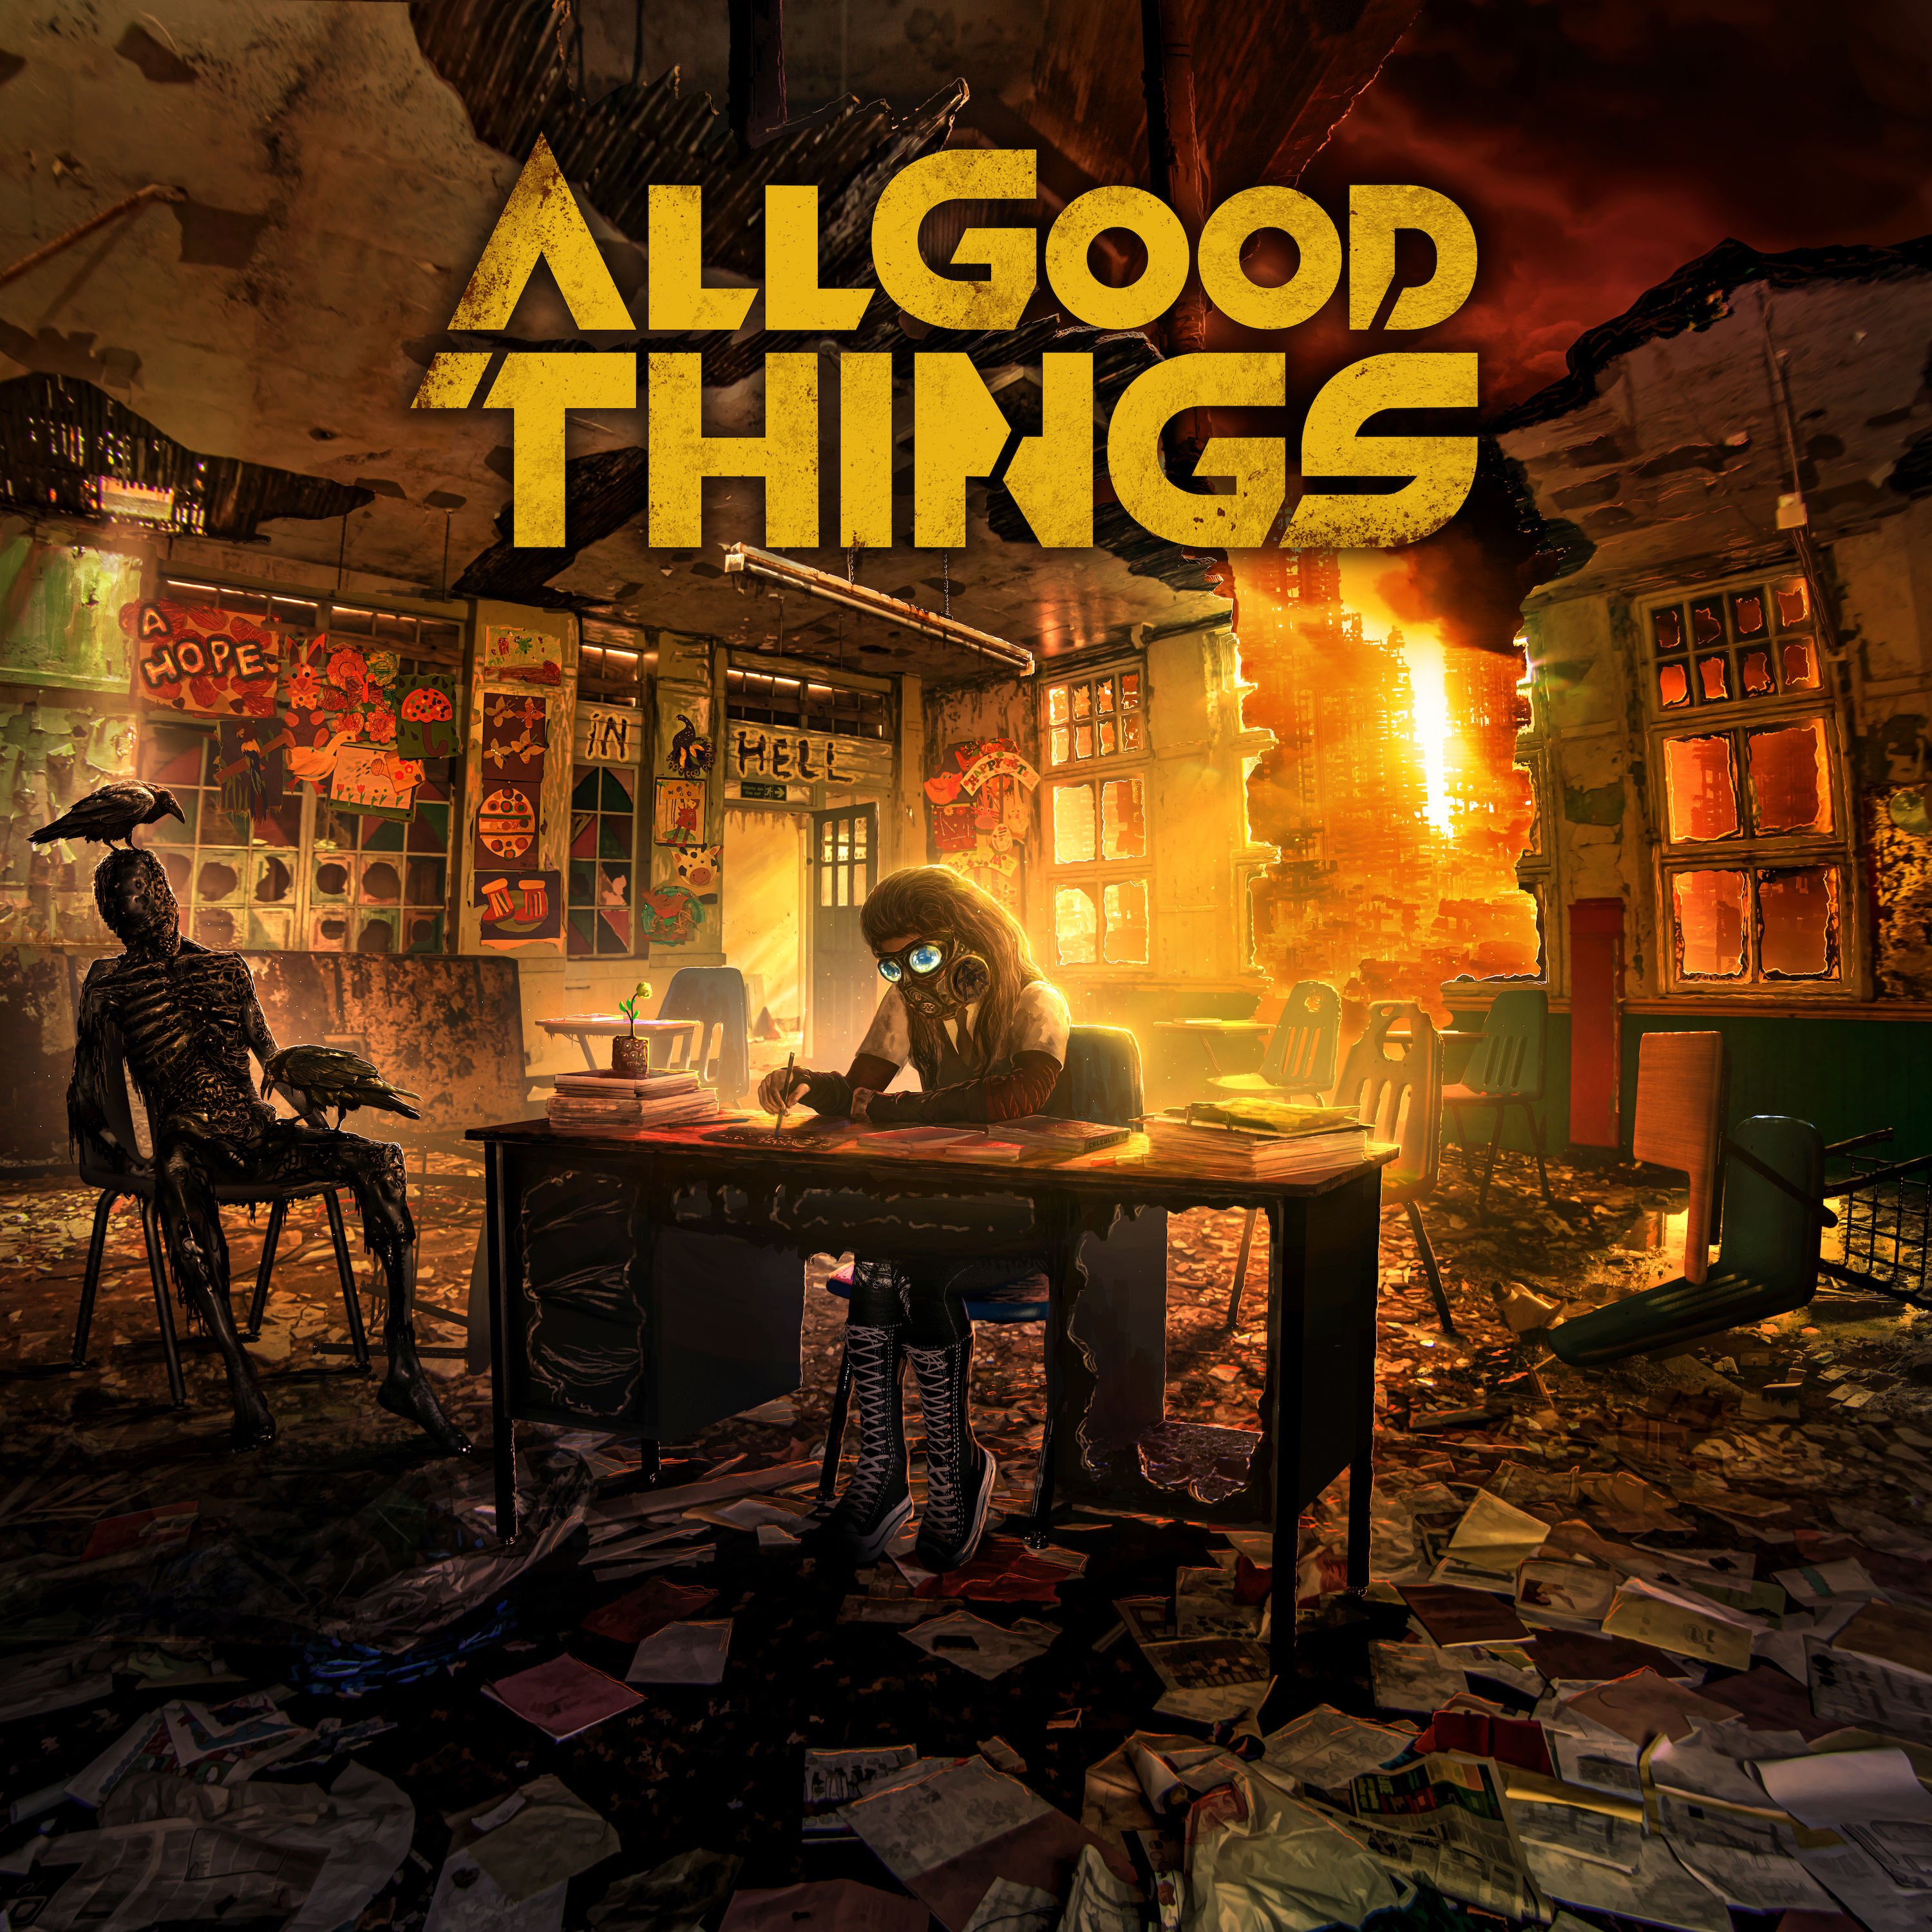 All Good Things - A Hope In Hell (2021) [FLAC 24bit/192kHz]